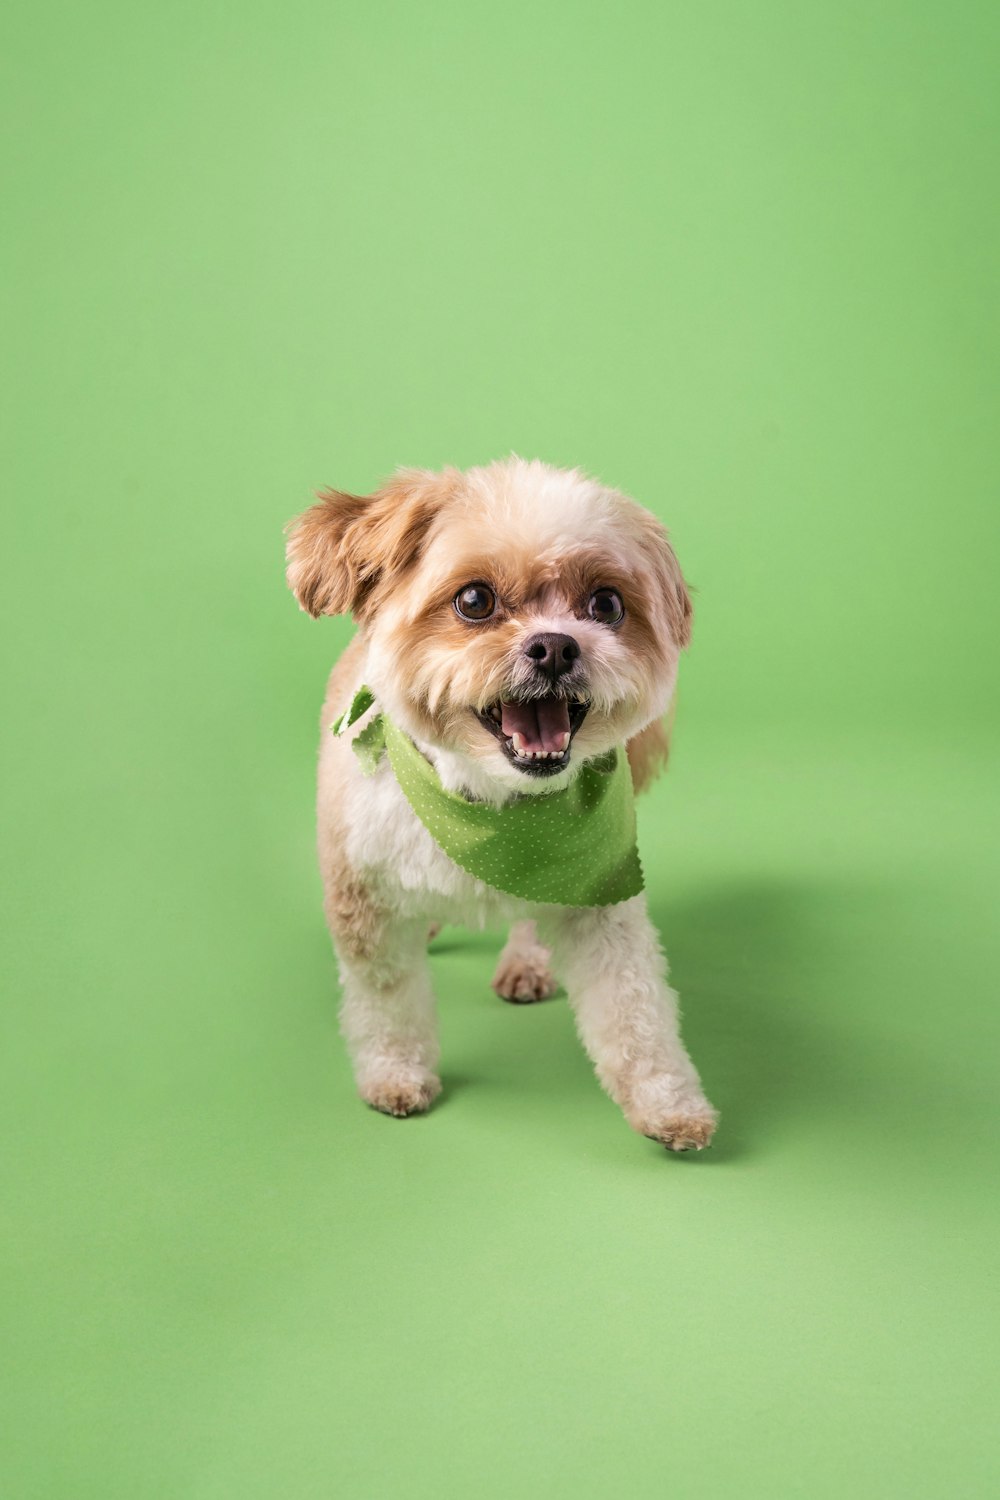 a small dog wearing a green scarf on a green background